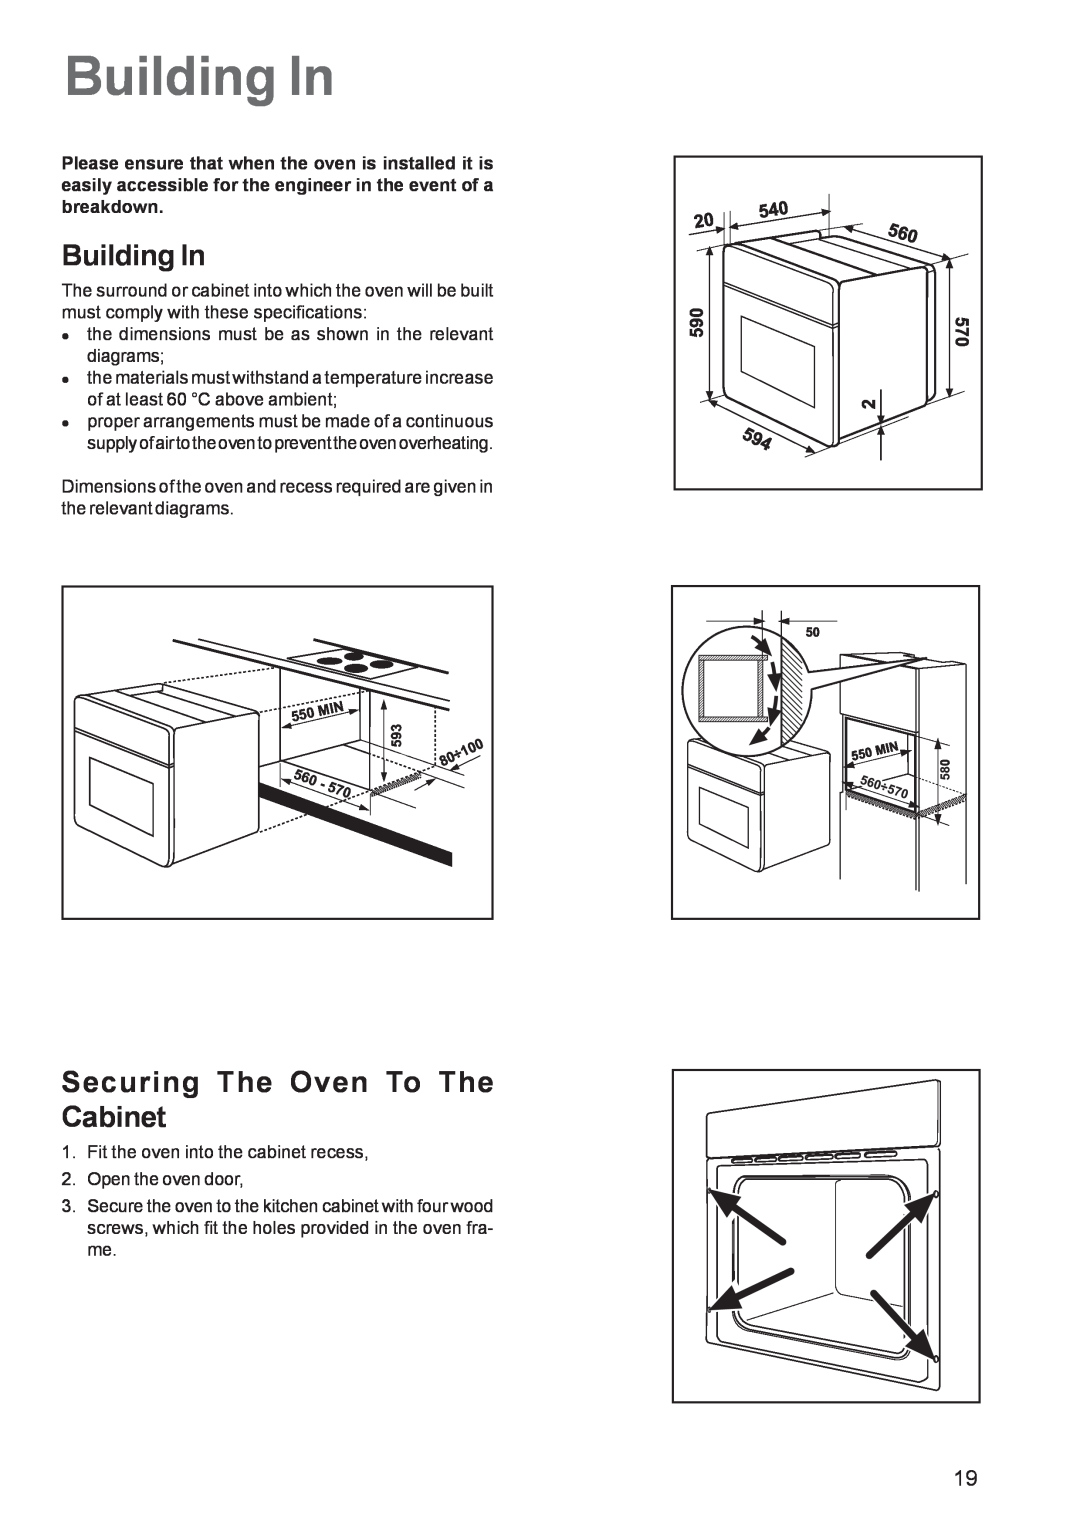 Zanussi ZBF 560 manual Building In, Securing The Oven To The Cabinet 